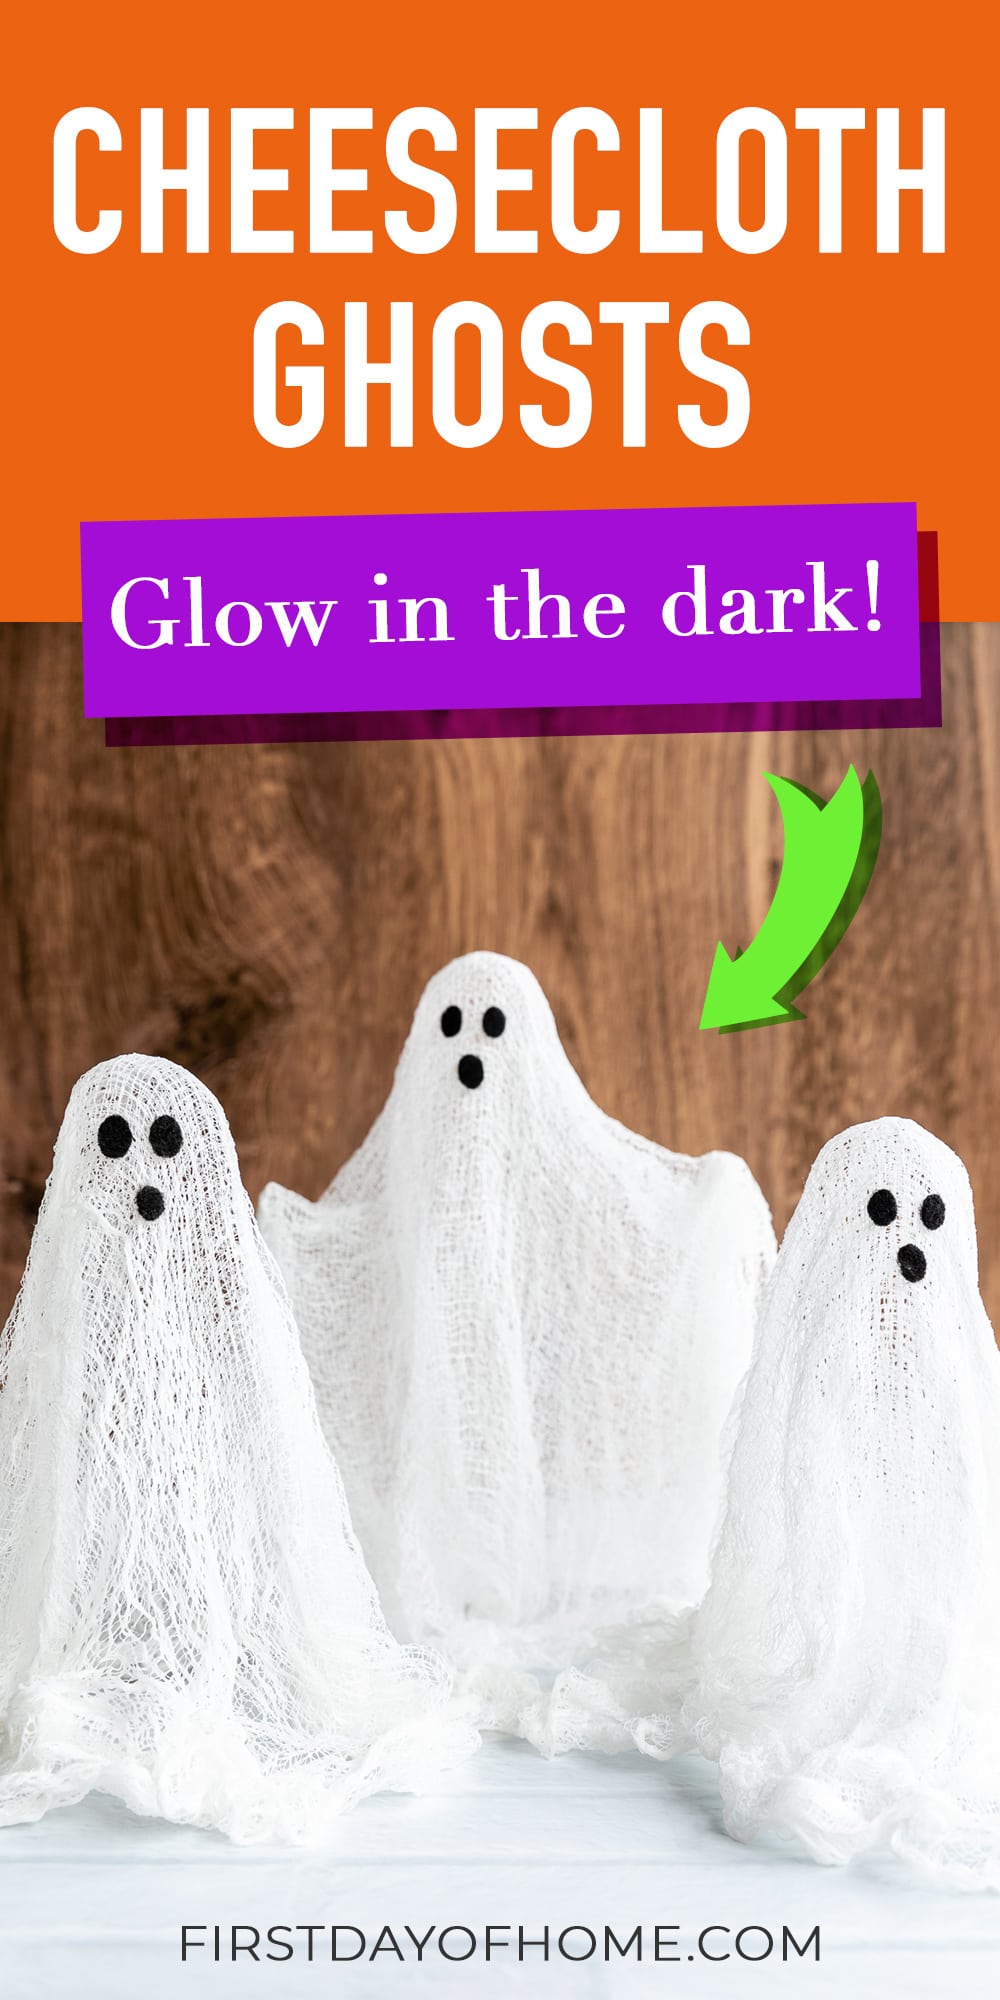 Trio of cheesecloth ghosts with text overlay that reads "Cheesecloth ghosts: glow in the dark"